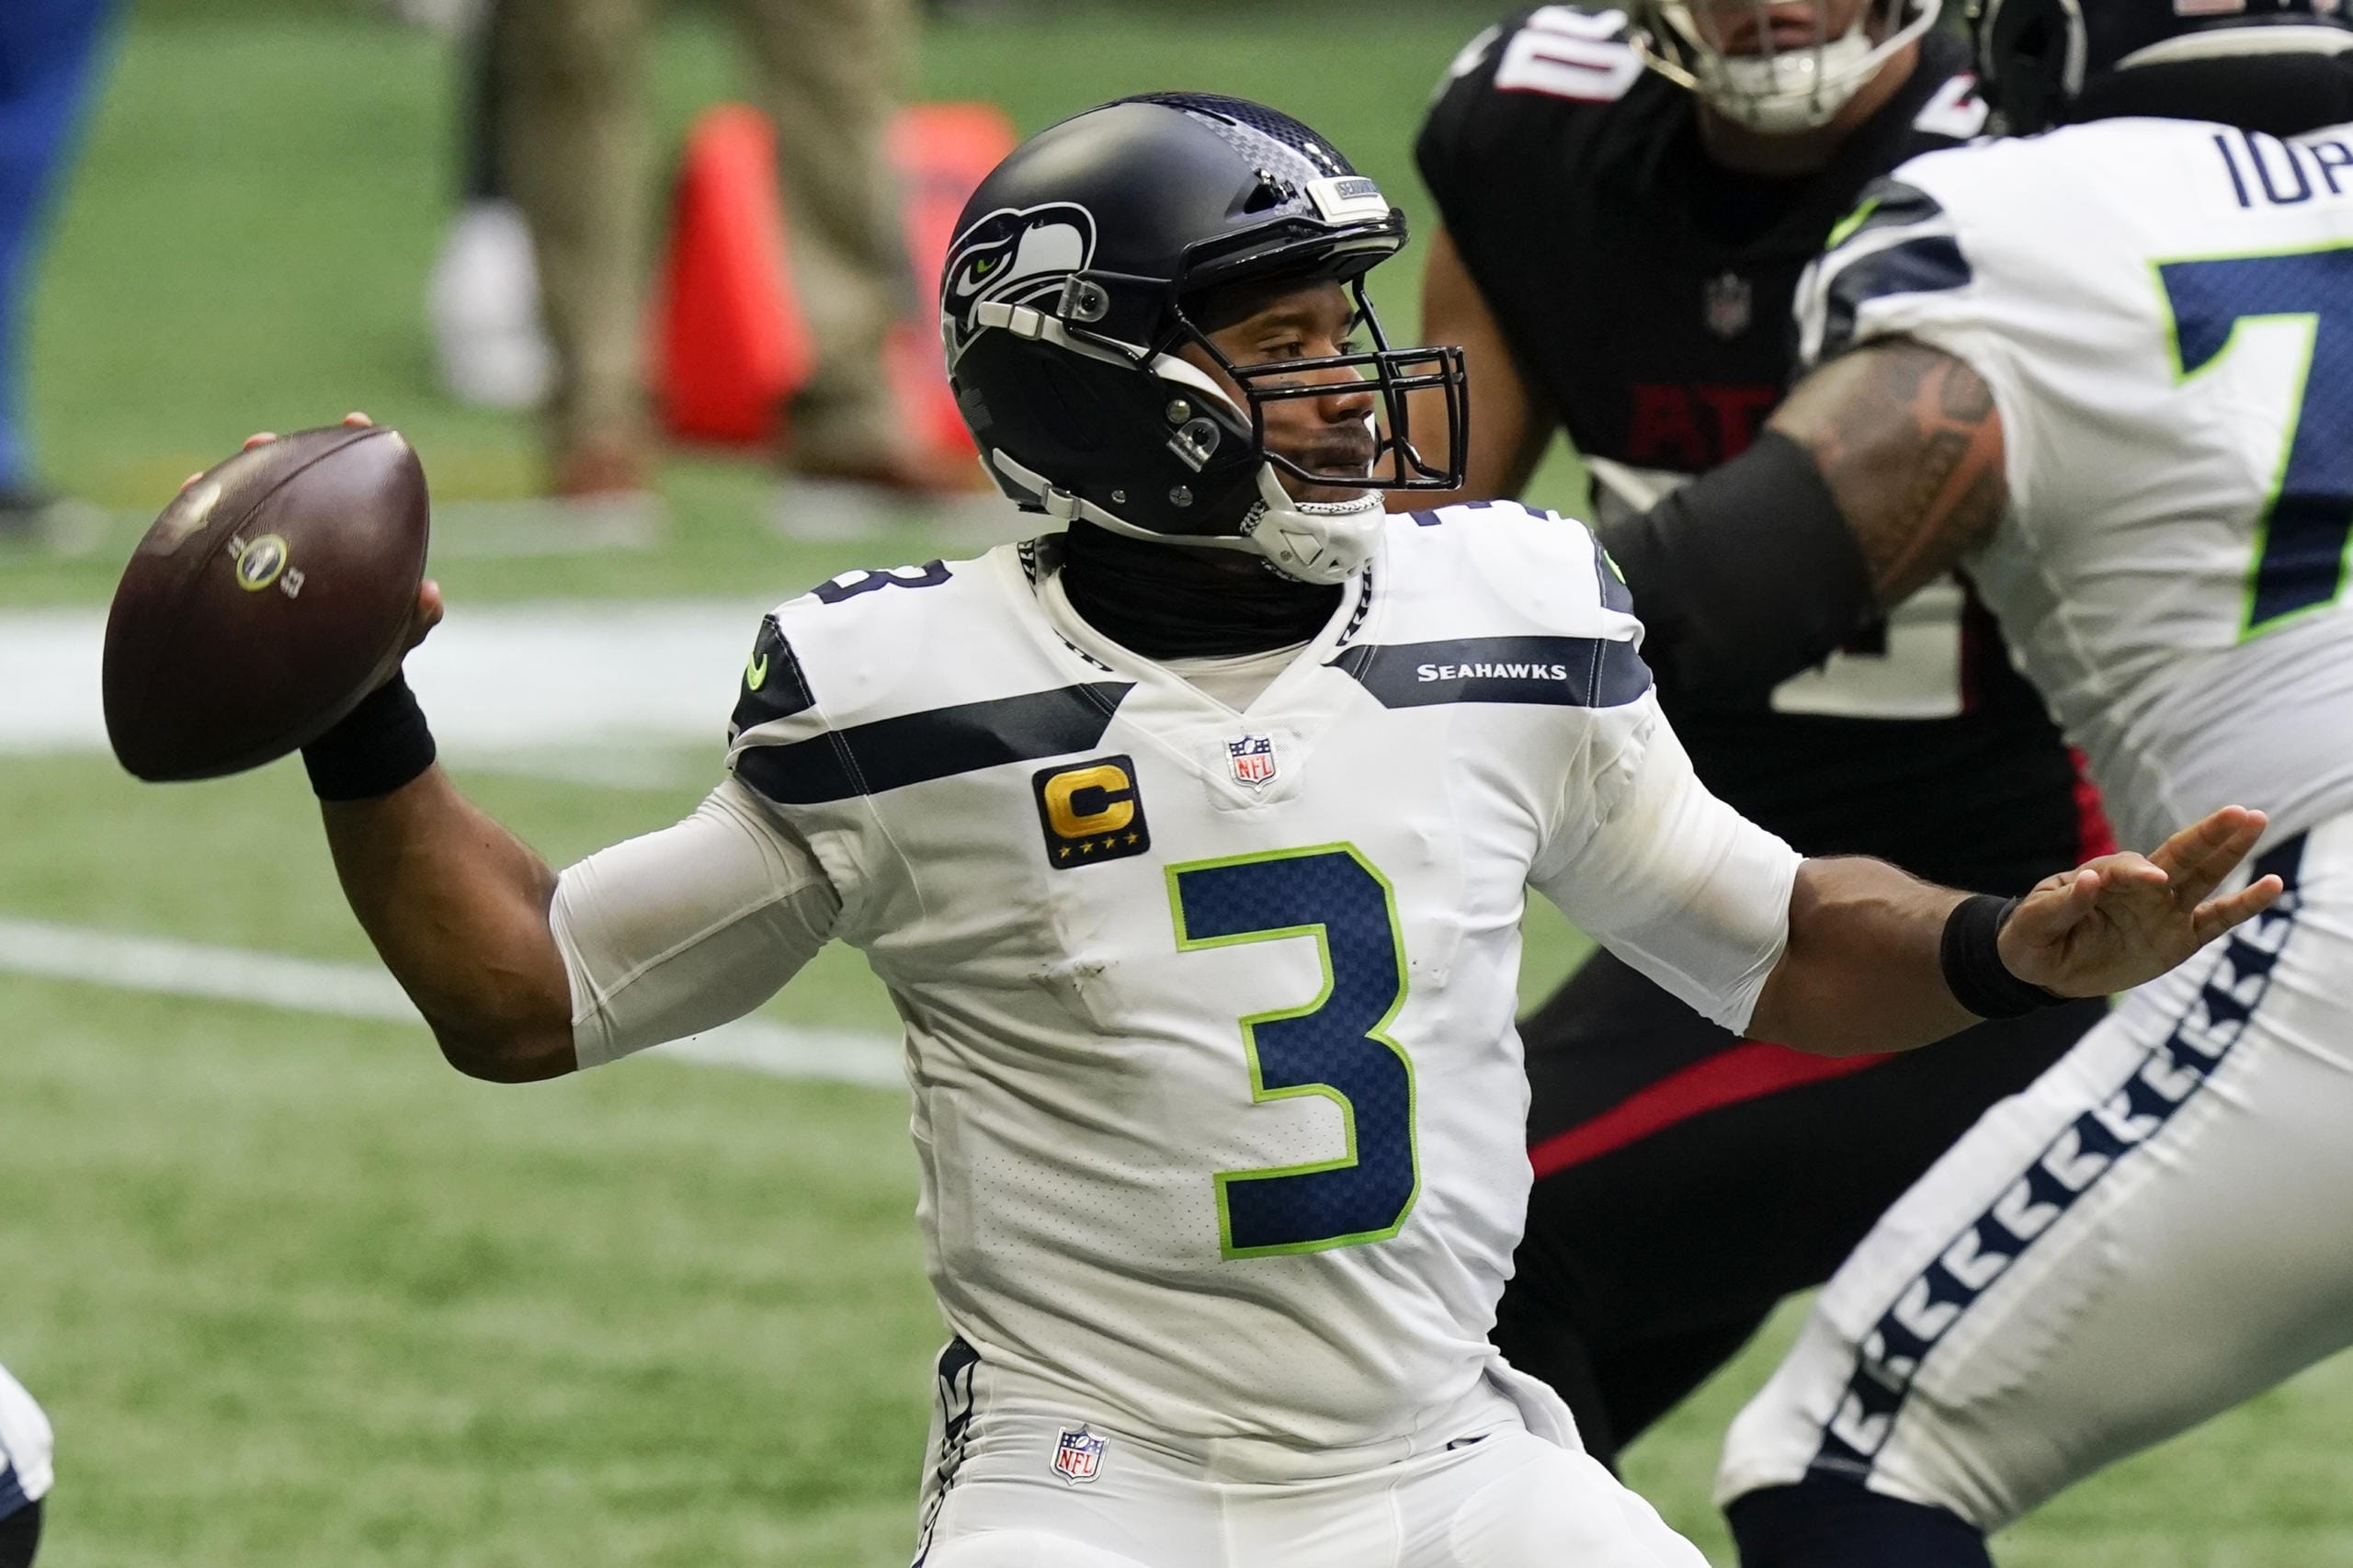 Seattle Seahawks quarterback Russell Wilson (3) works in the p[ocket against the Atlanta Falcons during the first half of an NFL football game, Sunday, Sept. 13, 2020, in Atlanta.